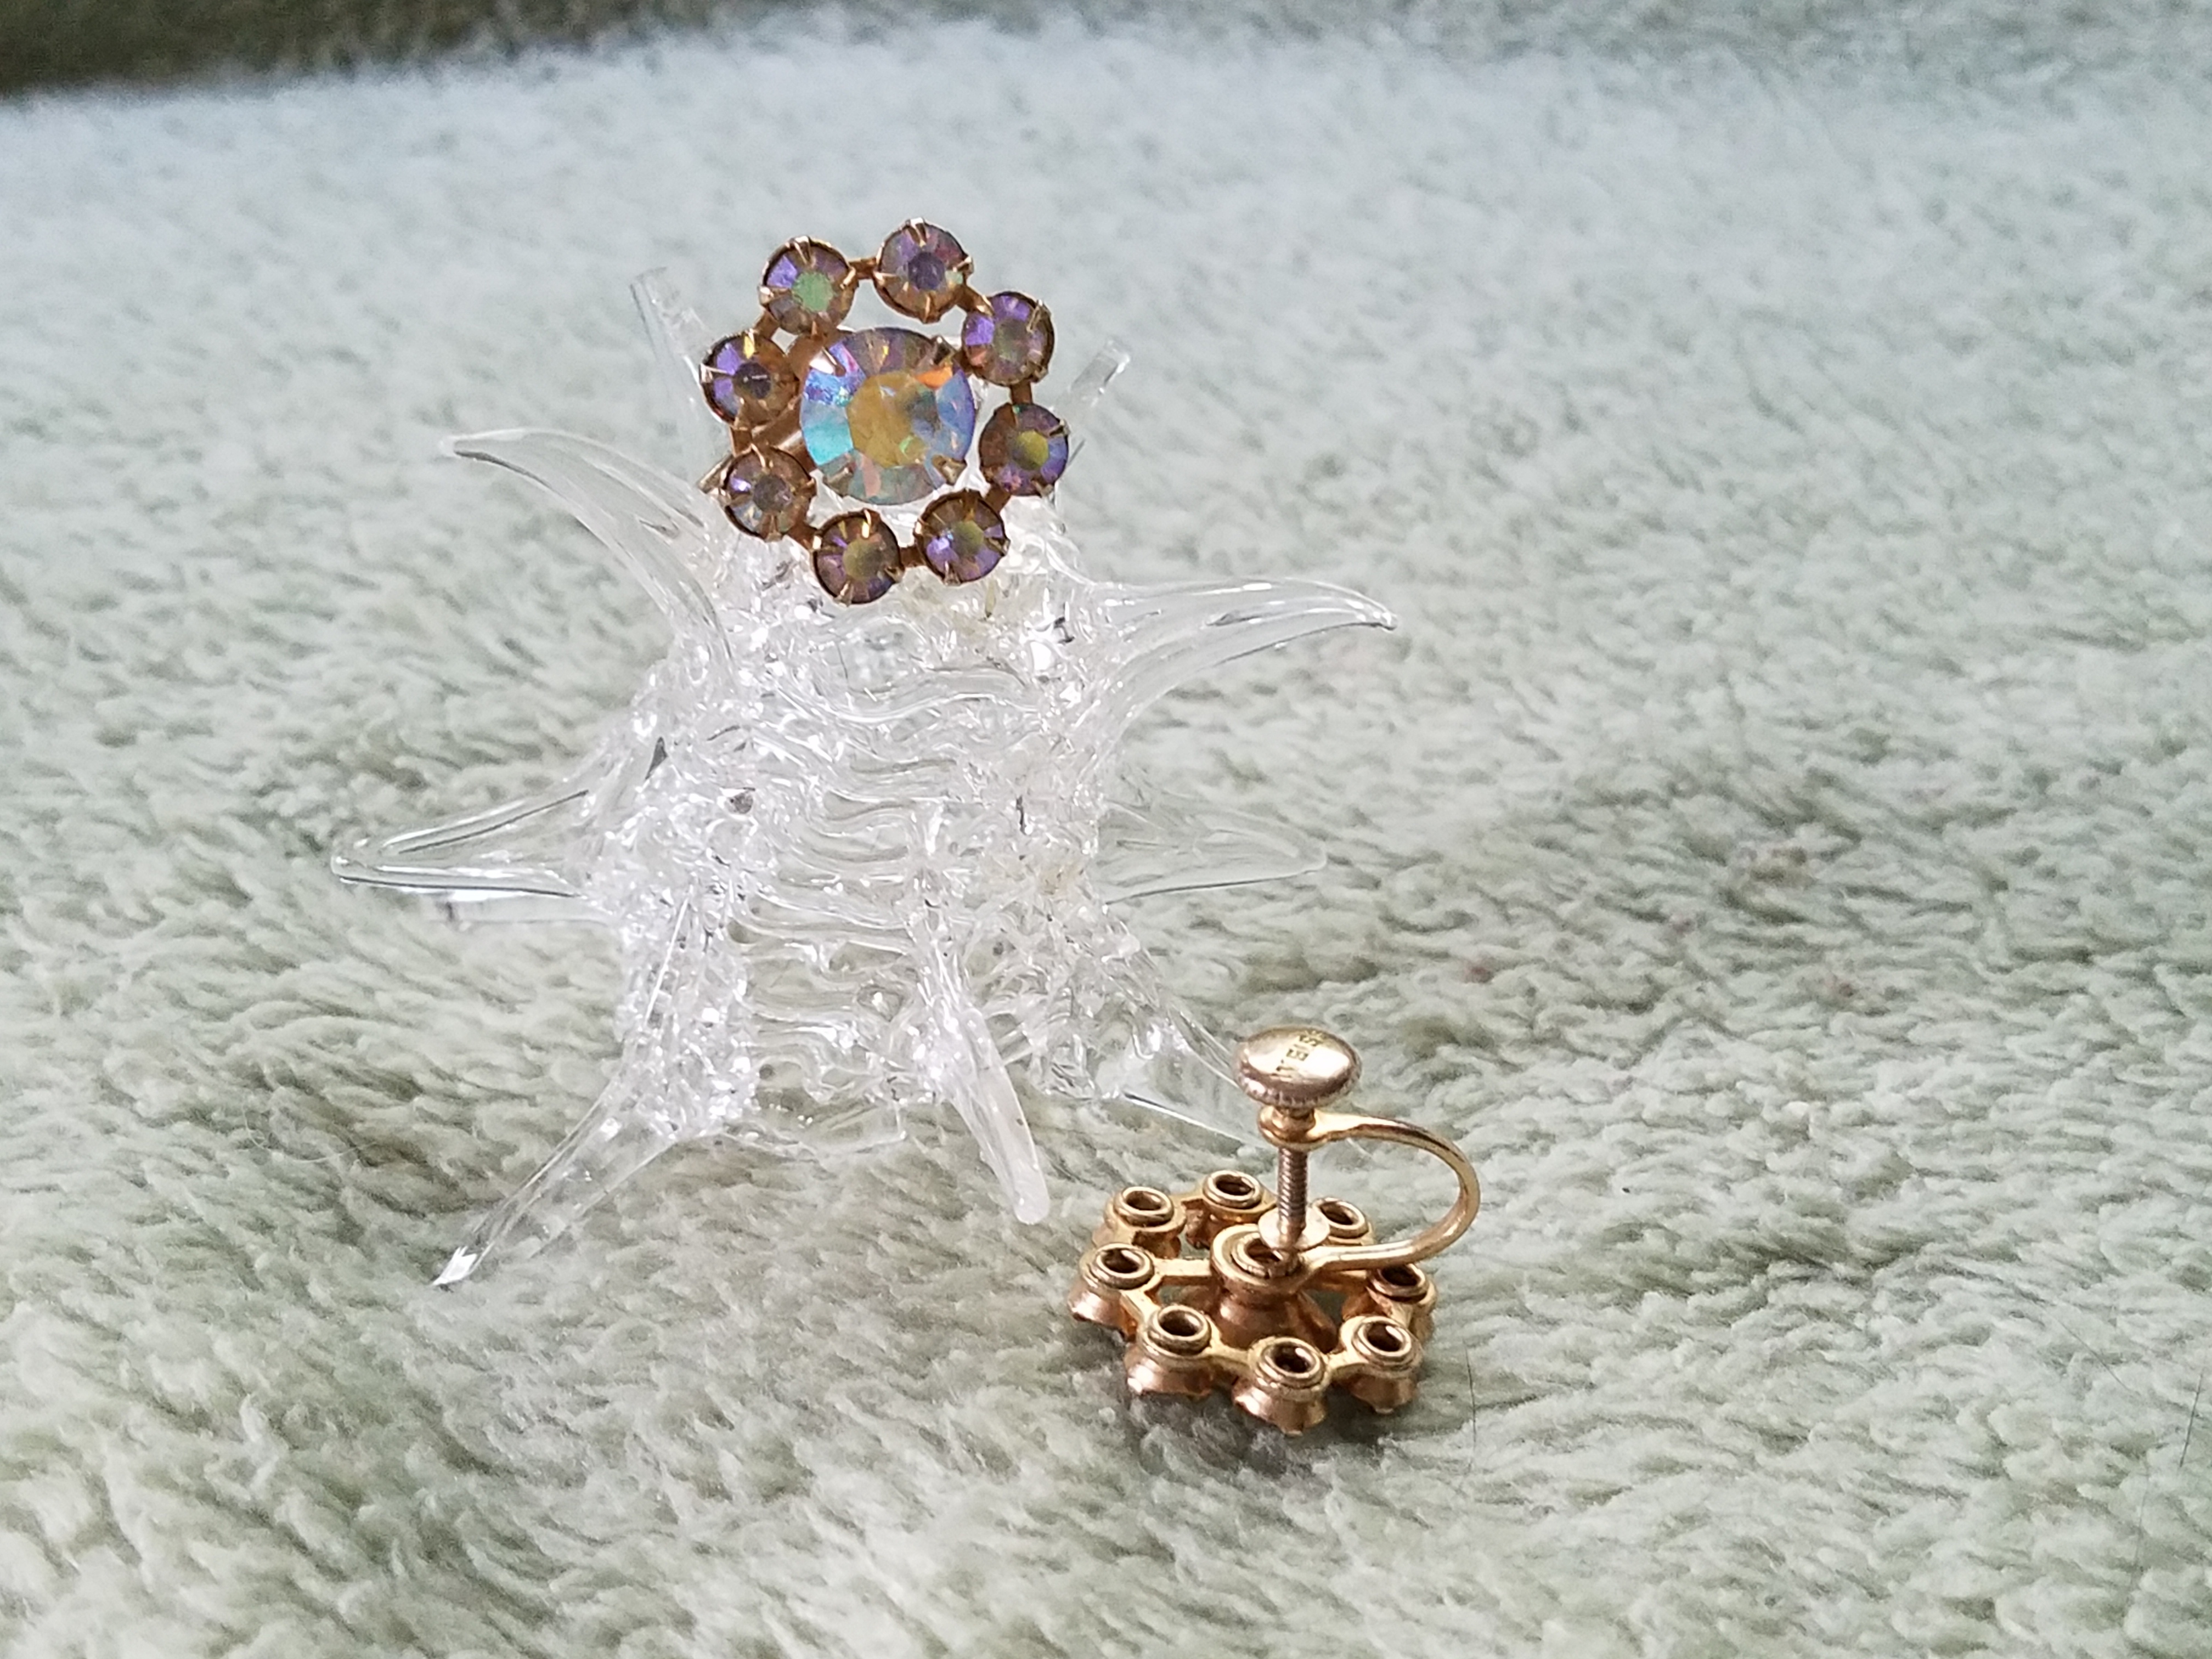 Replacement Earring Bell Back - Large - The Jeweled Lullaby